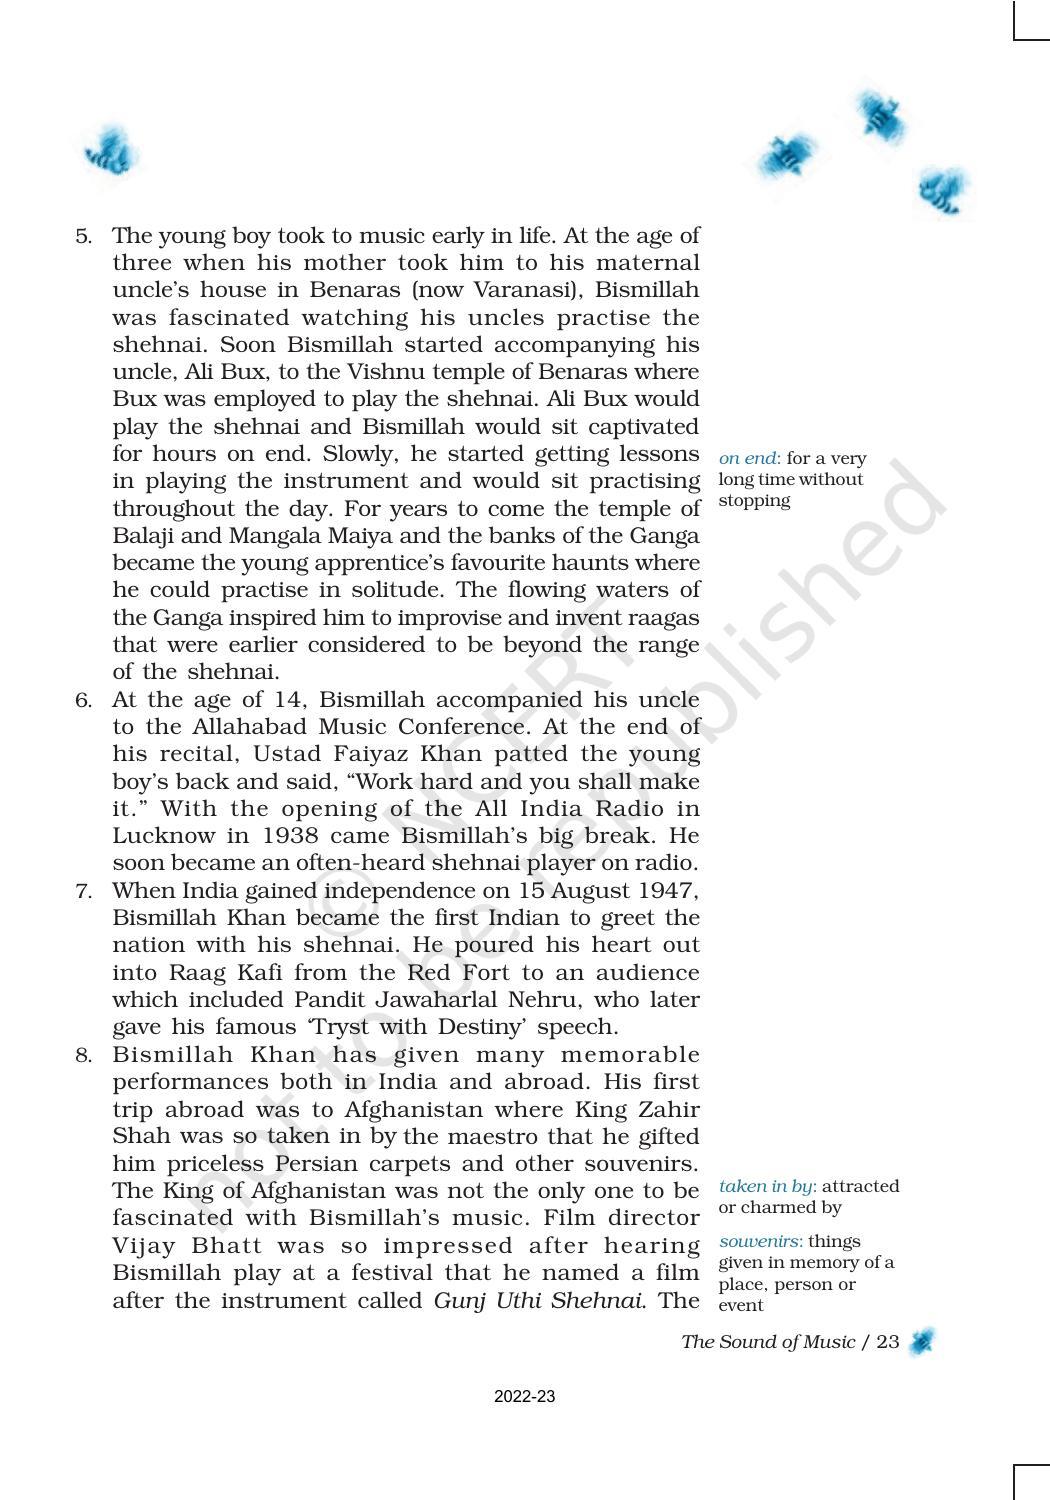 NCERT Book for Class 9 English Chapter 2 The Sound of Music - Page 7